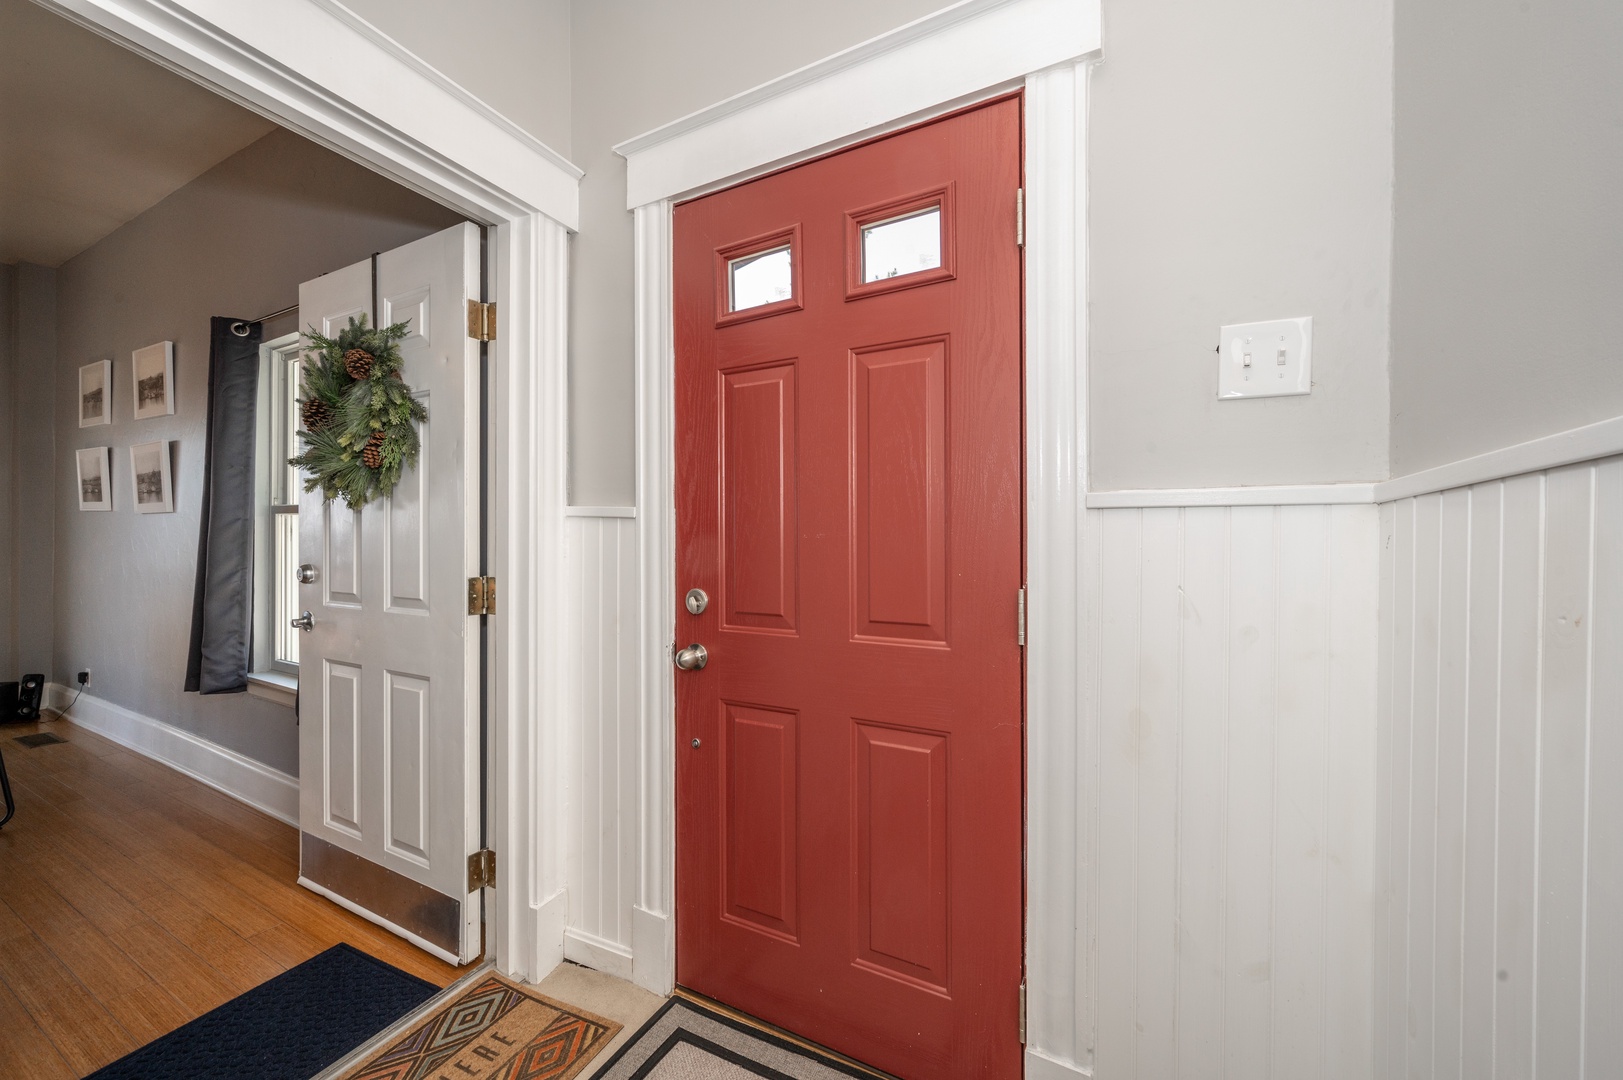 A charming entryway will welcome you home